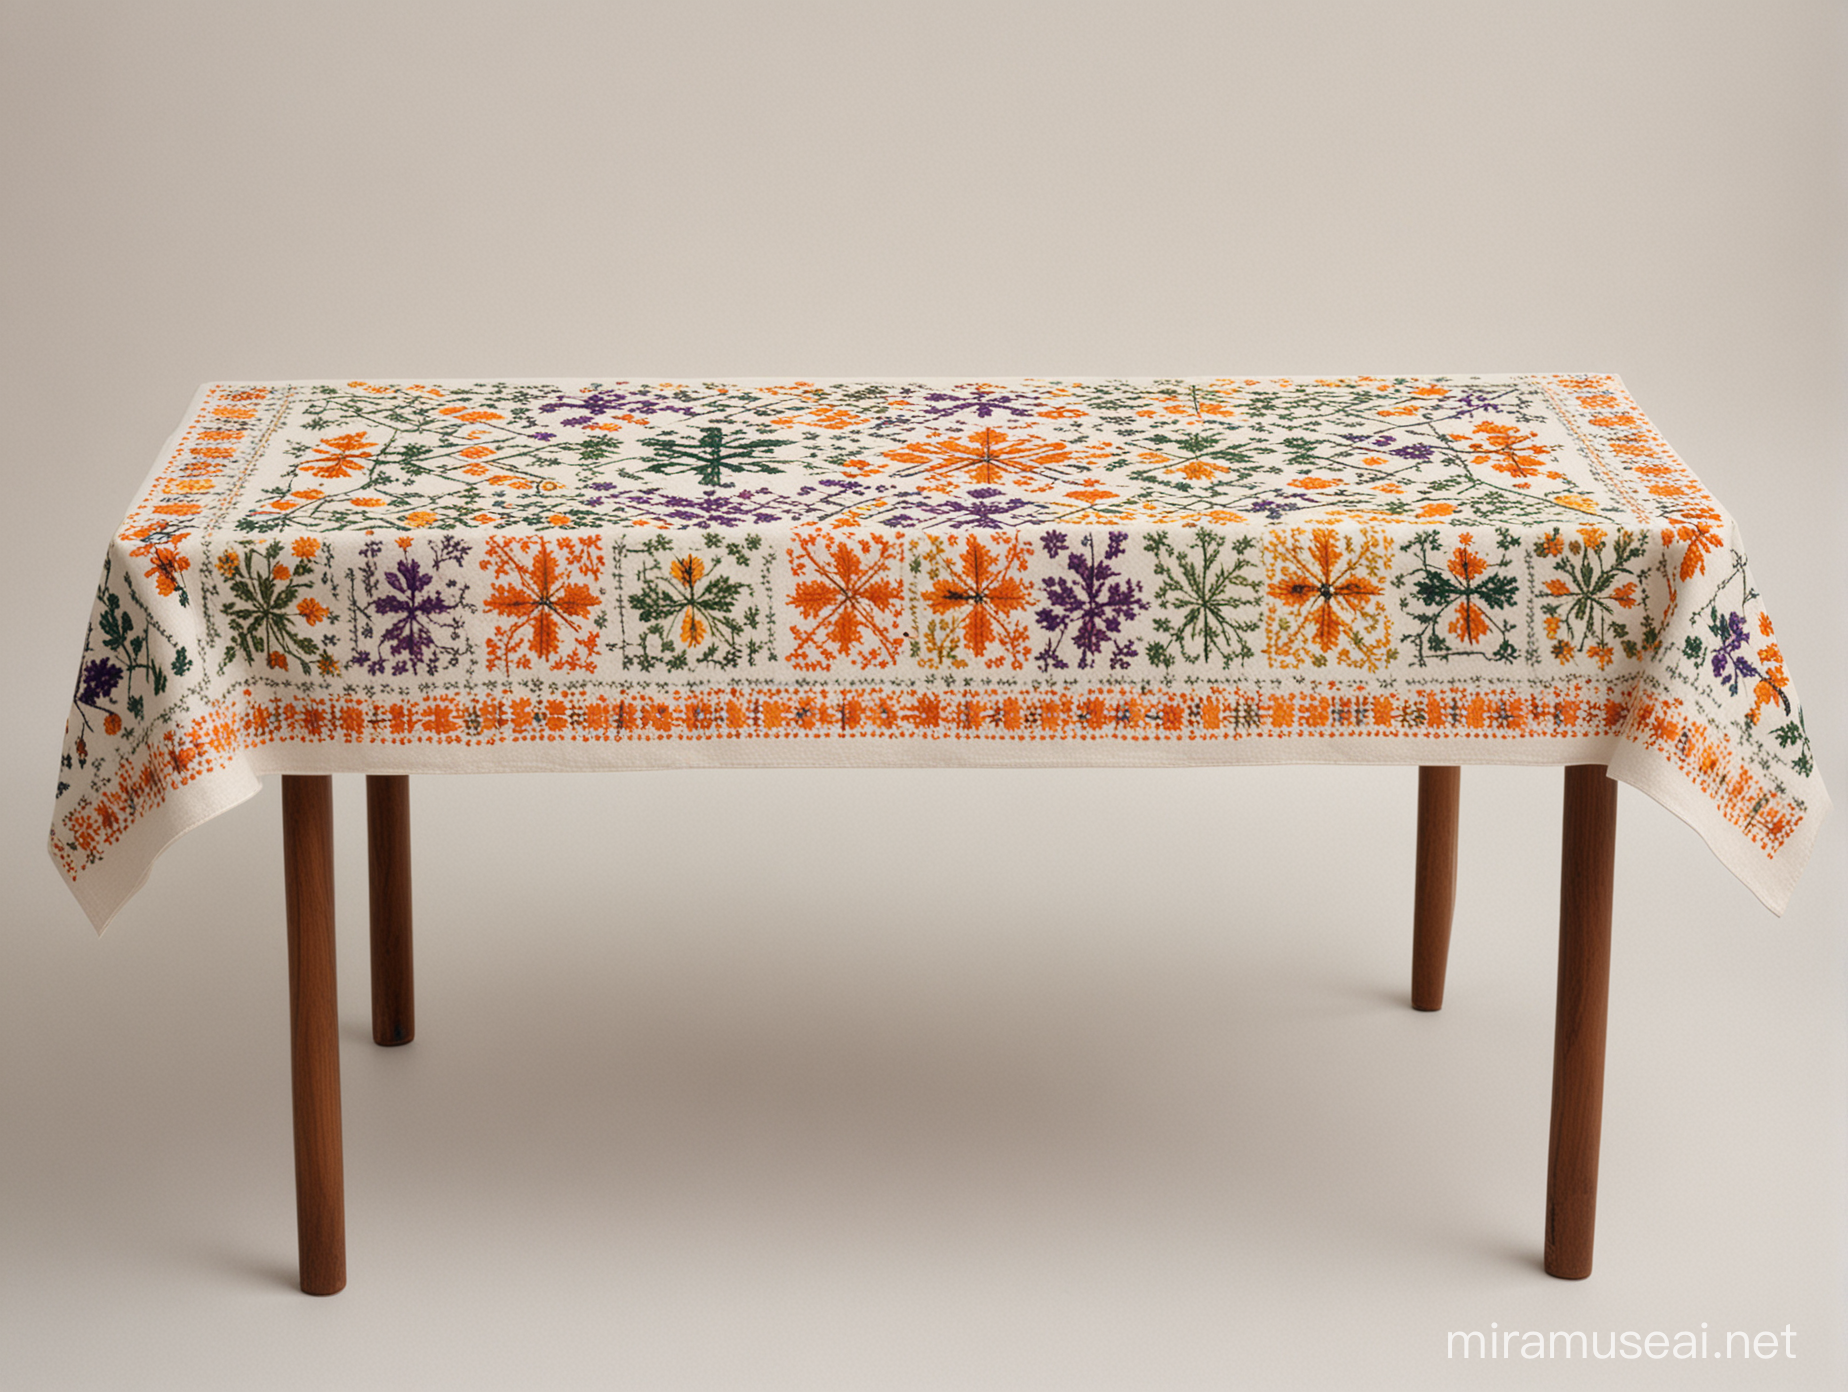 Hand Embroidered Folk Pattern Tablecloth in Violet Orange and Green